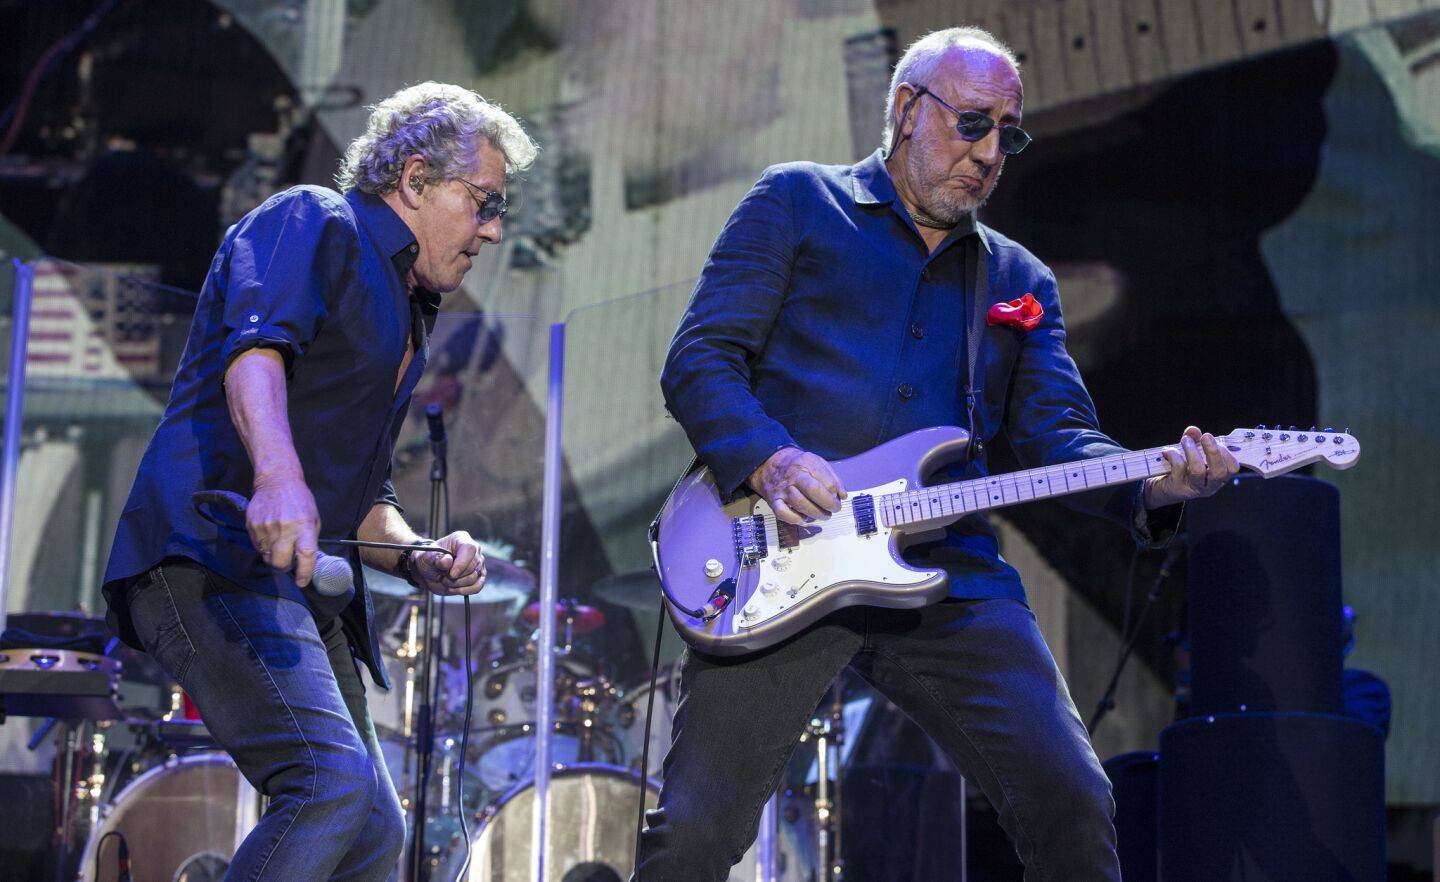 The Who's Roger Daltrey, left, and Pete Townshend, right, on stage at Desert Trip.